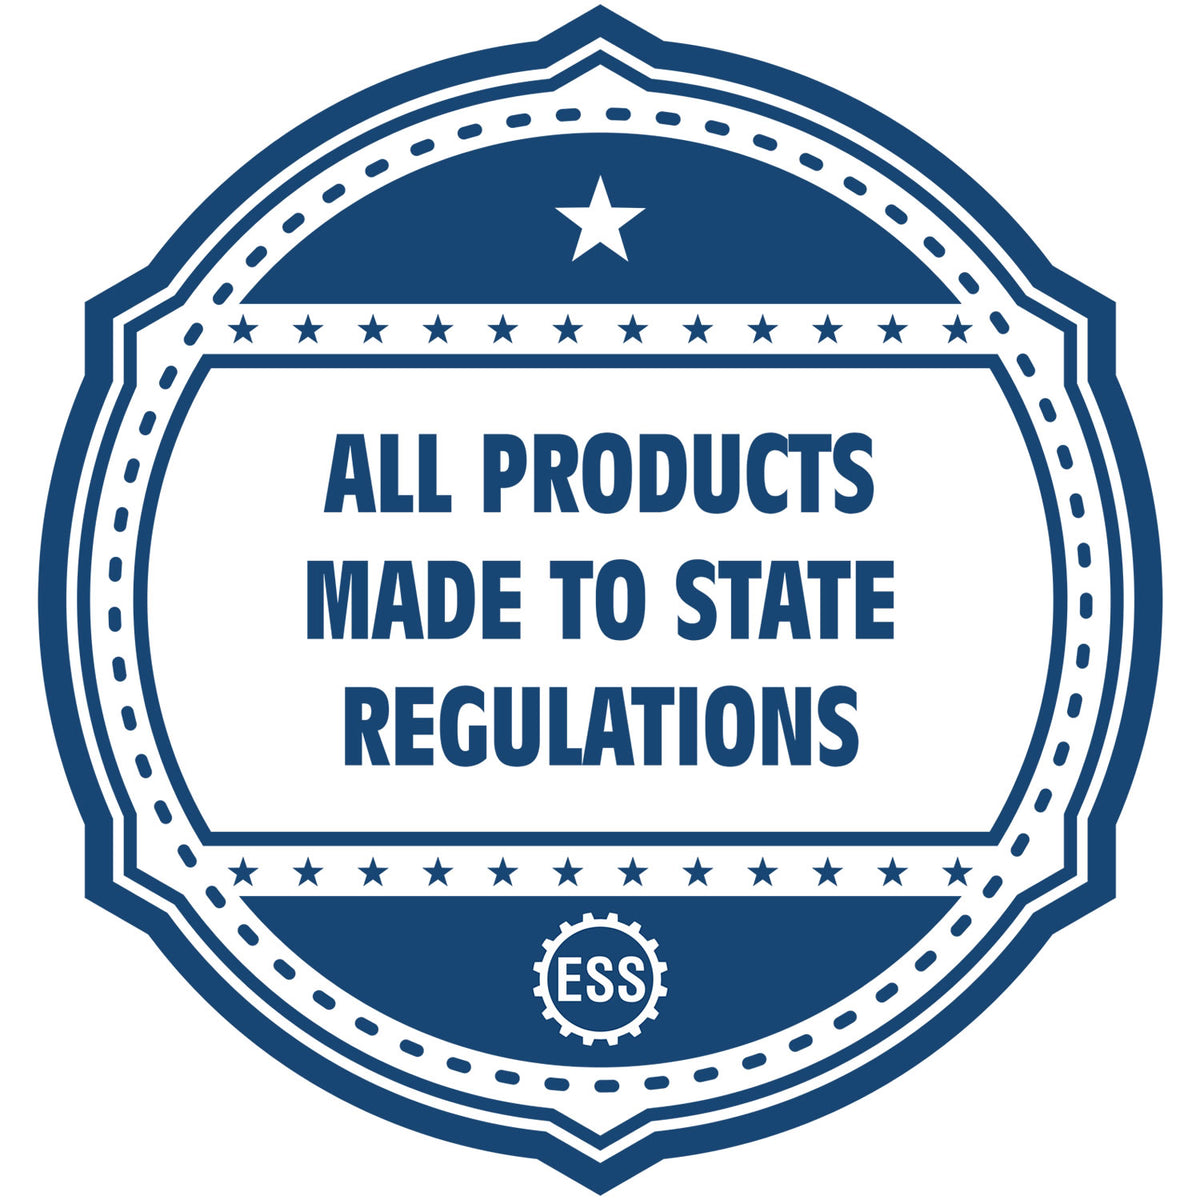 An icon or badge element for the Delaware Engineer Desk Seal showing that this product is made in compliance with state regulations.